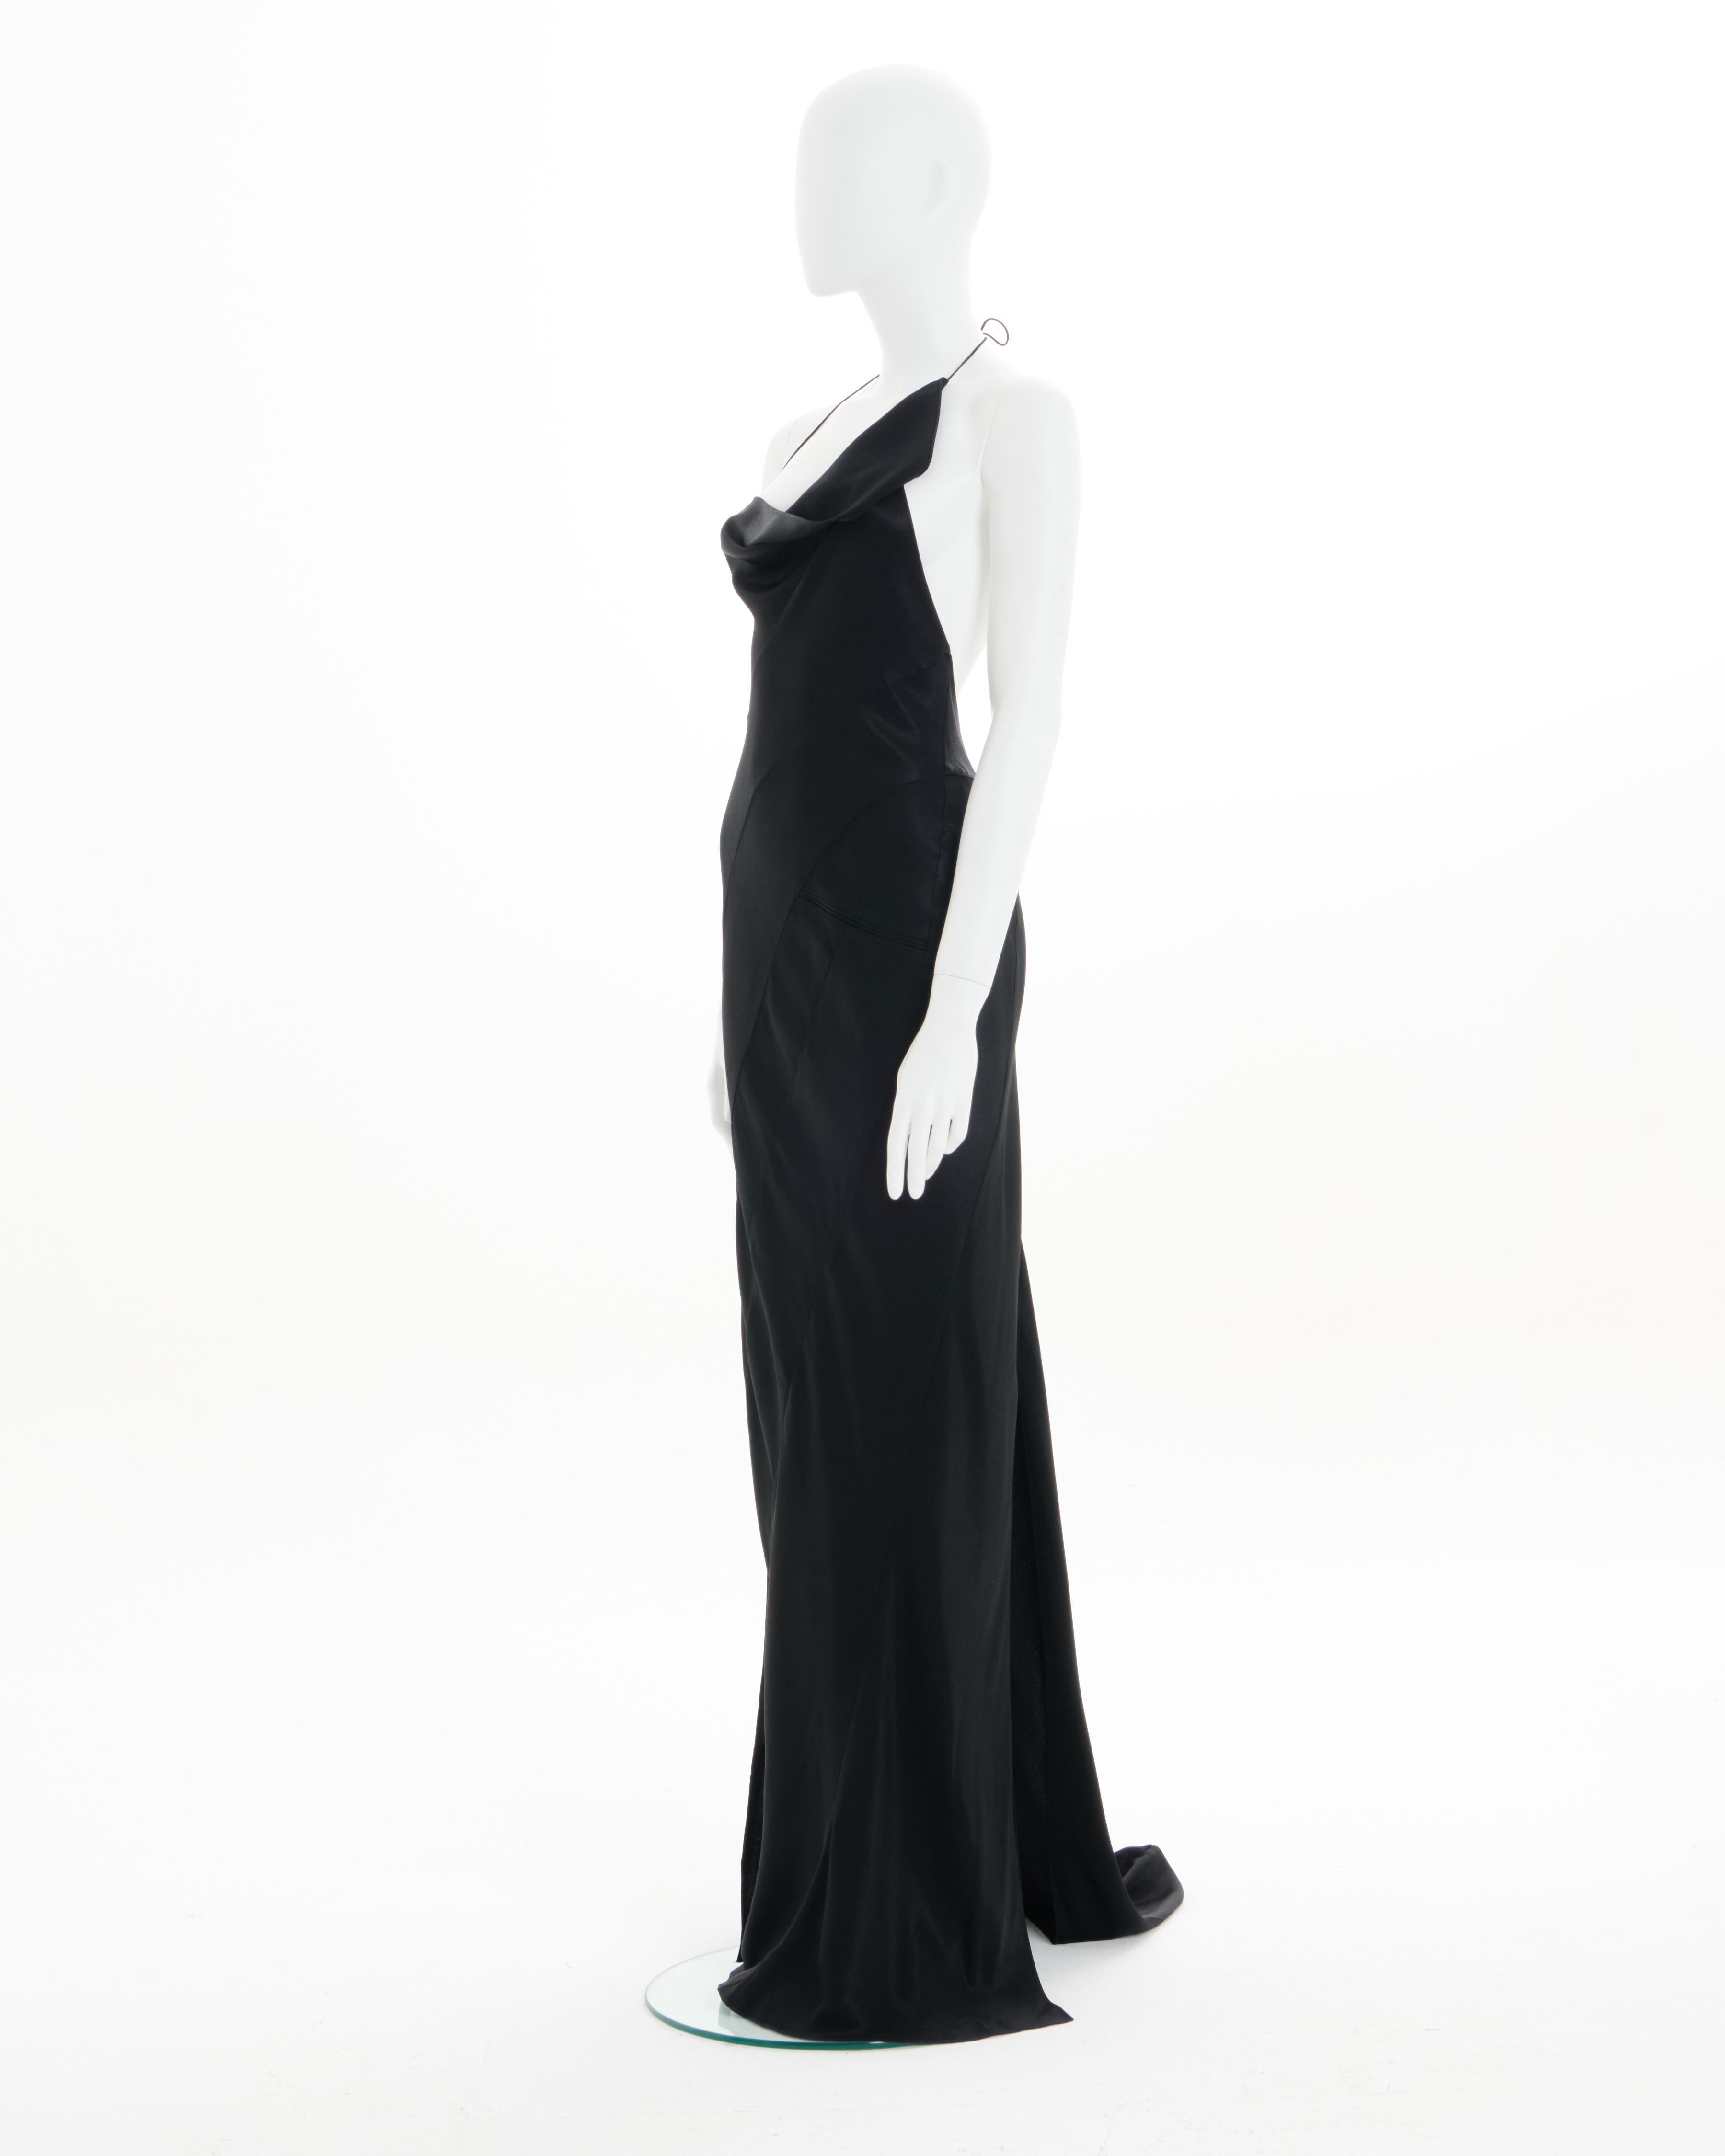 - Archival Christian Dior Evening Dress
- Sold by Skof.Archive
- Creative Director : John Galliano 
- Fall - Winter 2000
- Crafted from different panels of black bias-cut silk satin
- Adjustable American neckline 
- Floor-length skirt with train 
-